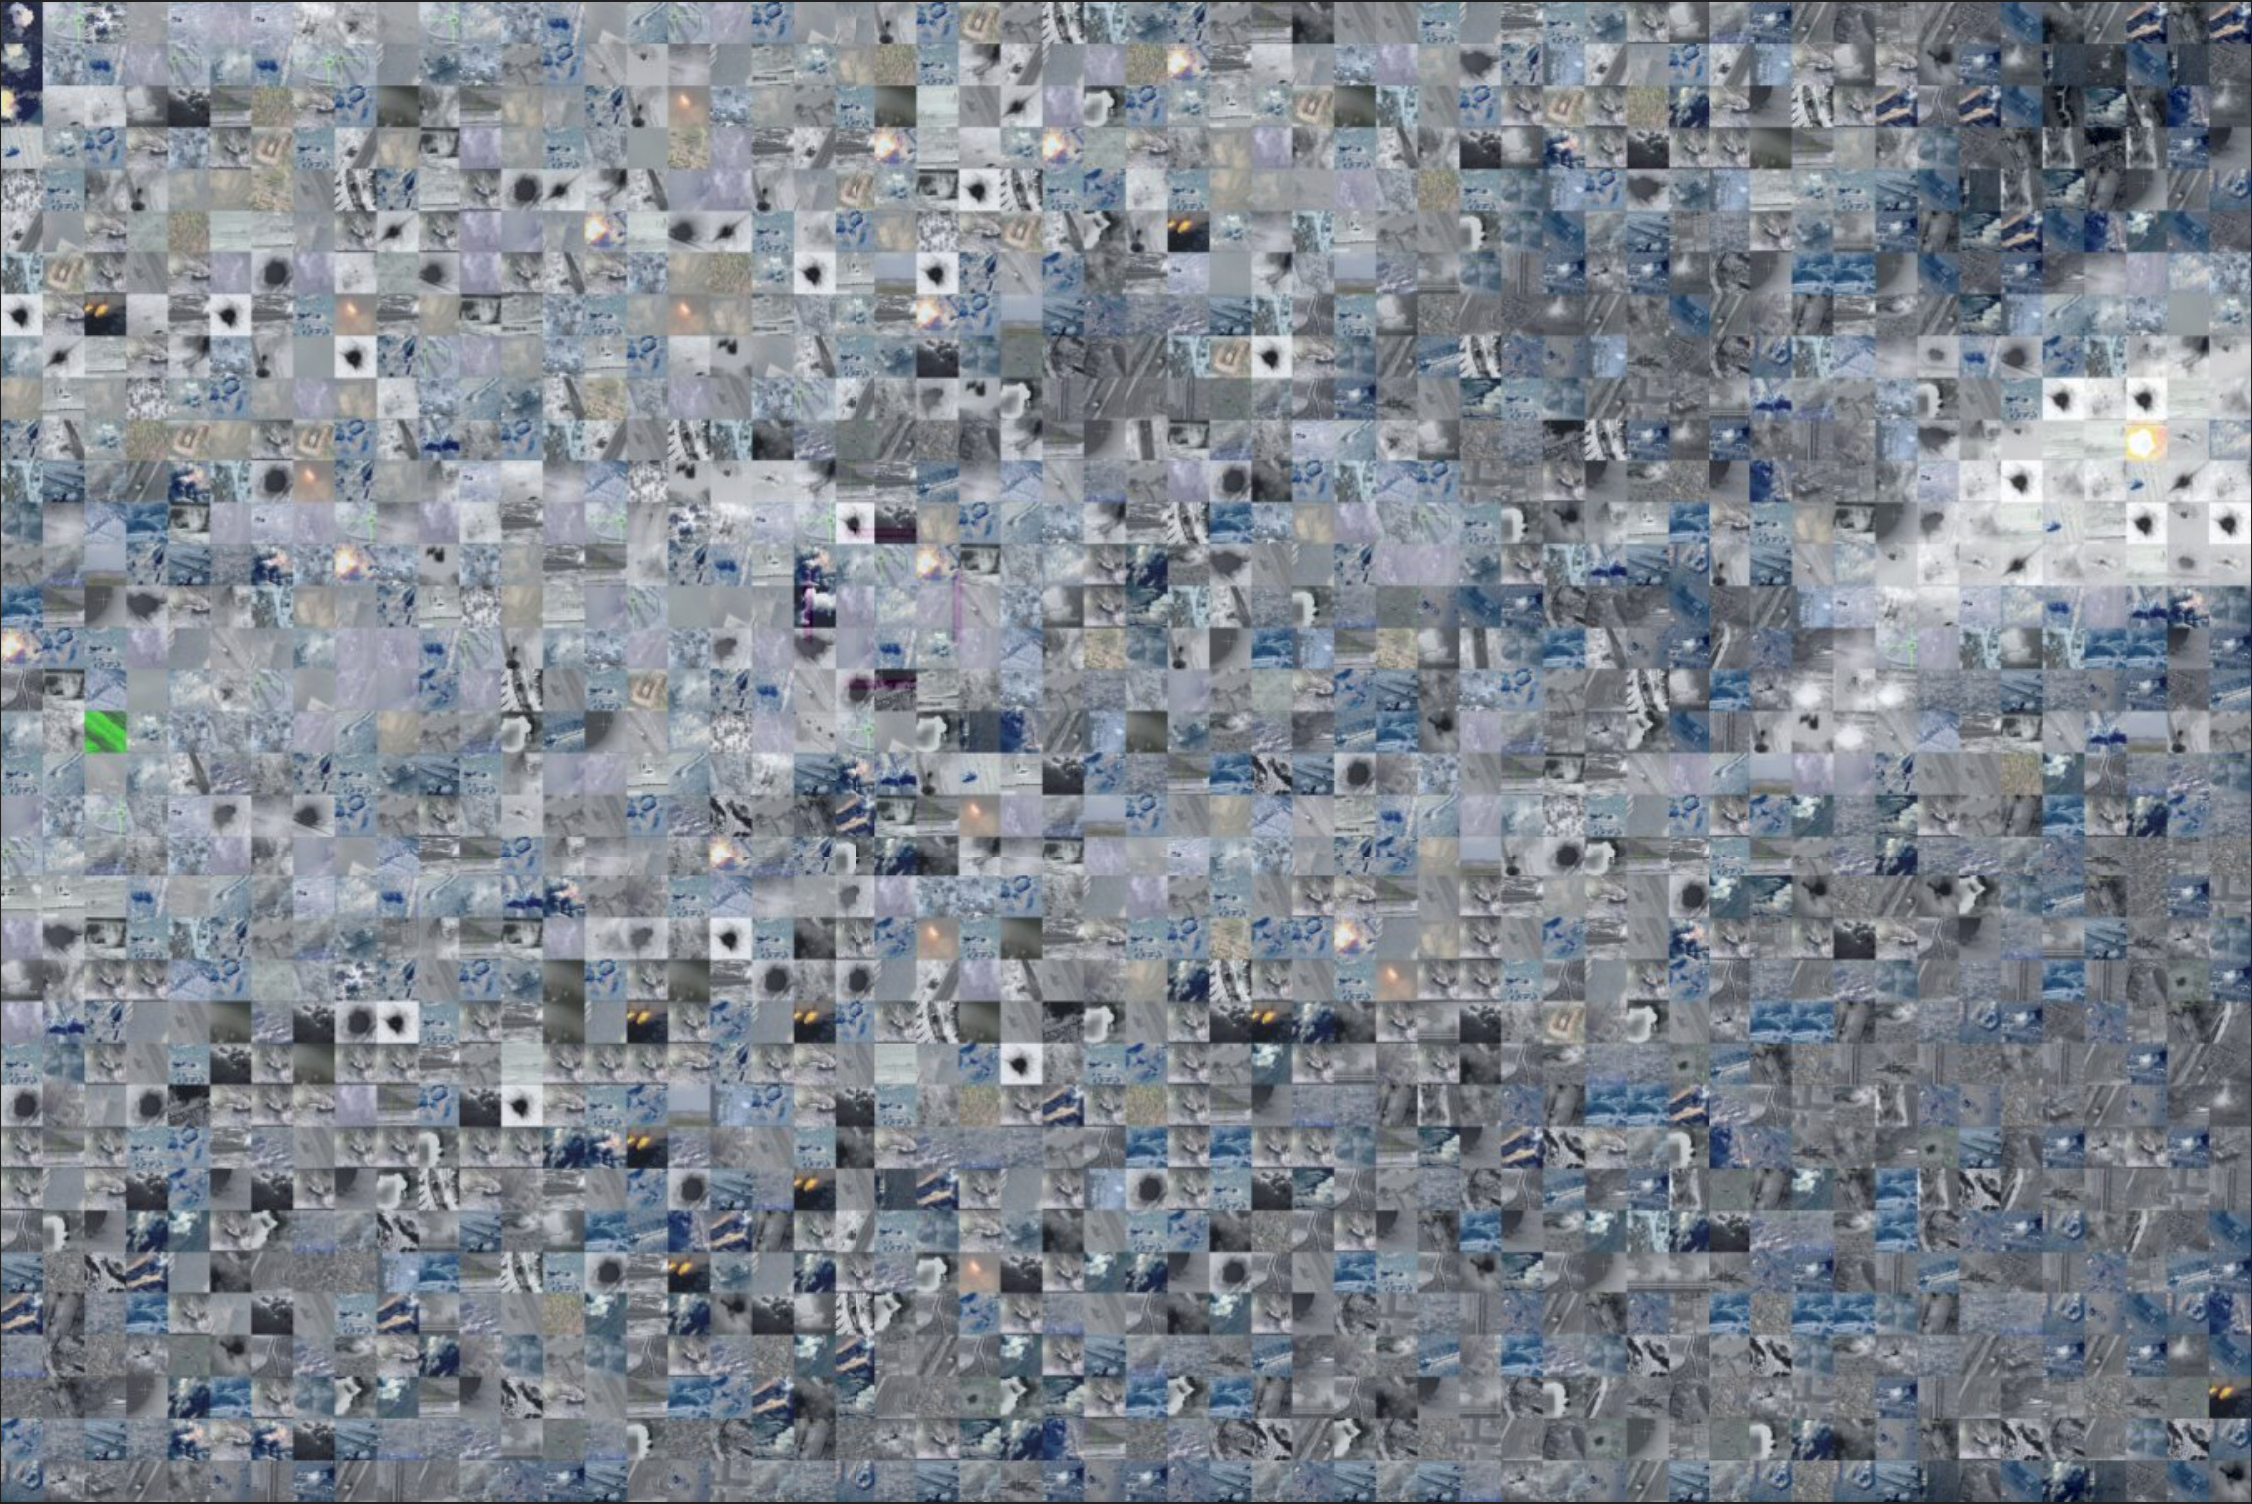 Mosaic composed of screenshots taken from videos of actual strikes, sourced from social media and used to compose the war dataset.